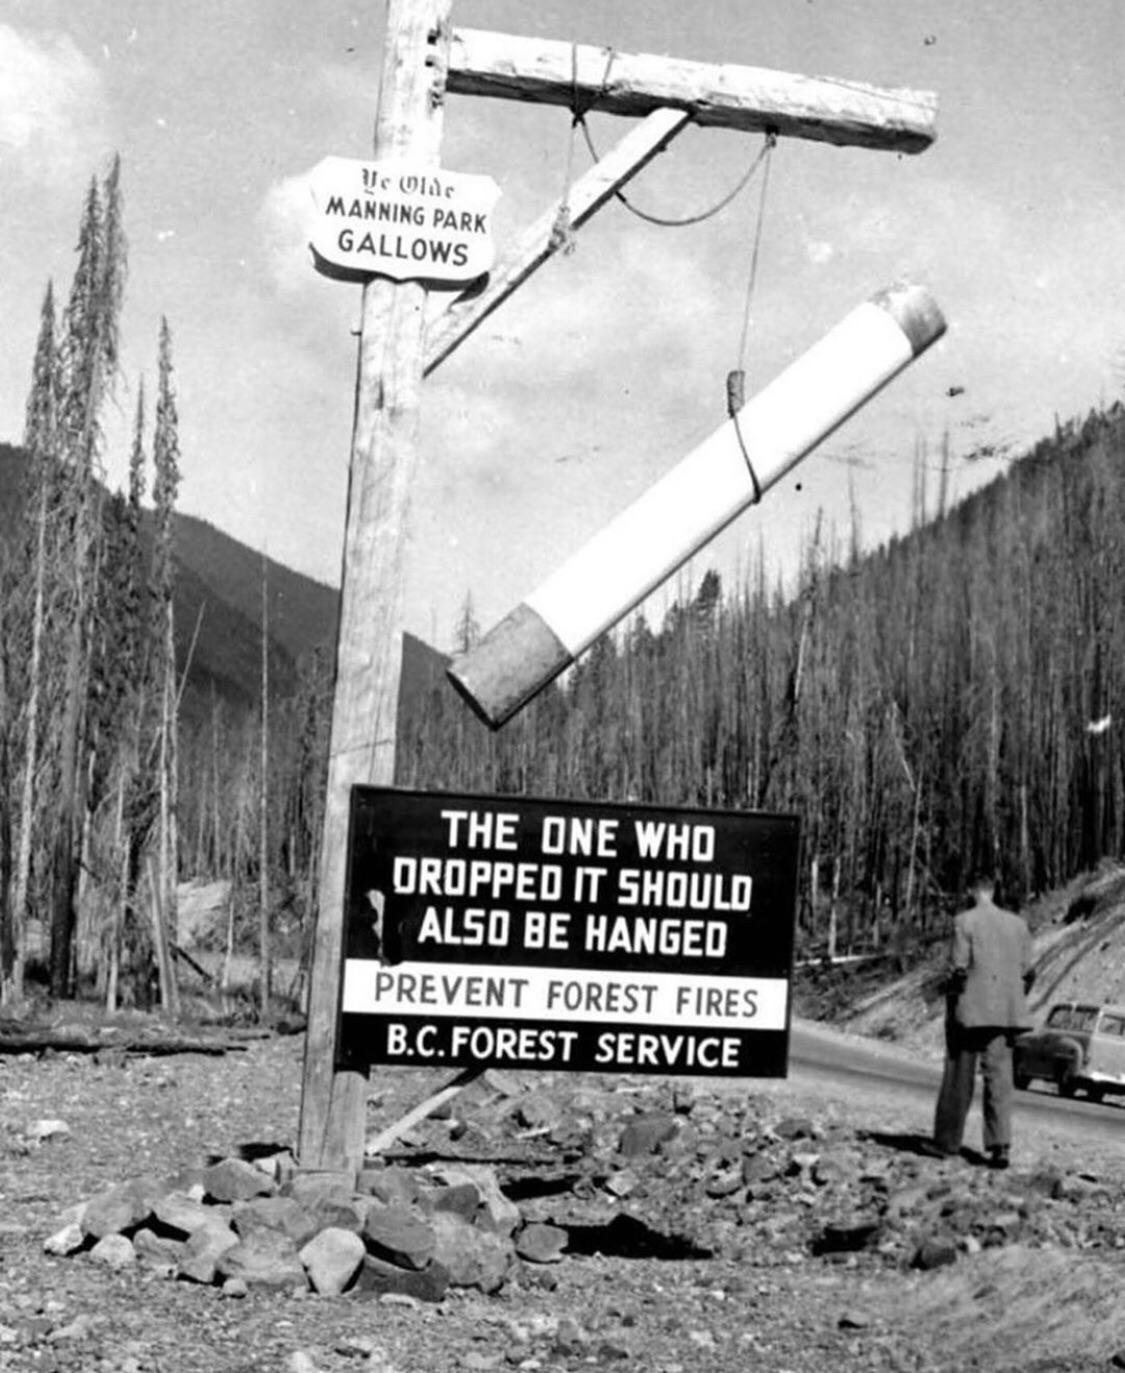 Canadian Forestry service doesn't play, British Columbia, circa 1950.